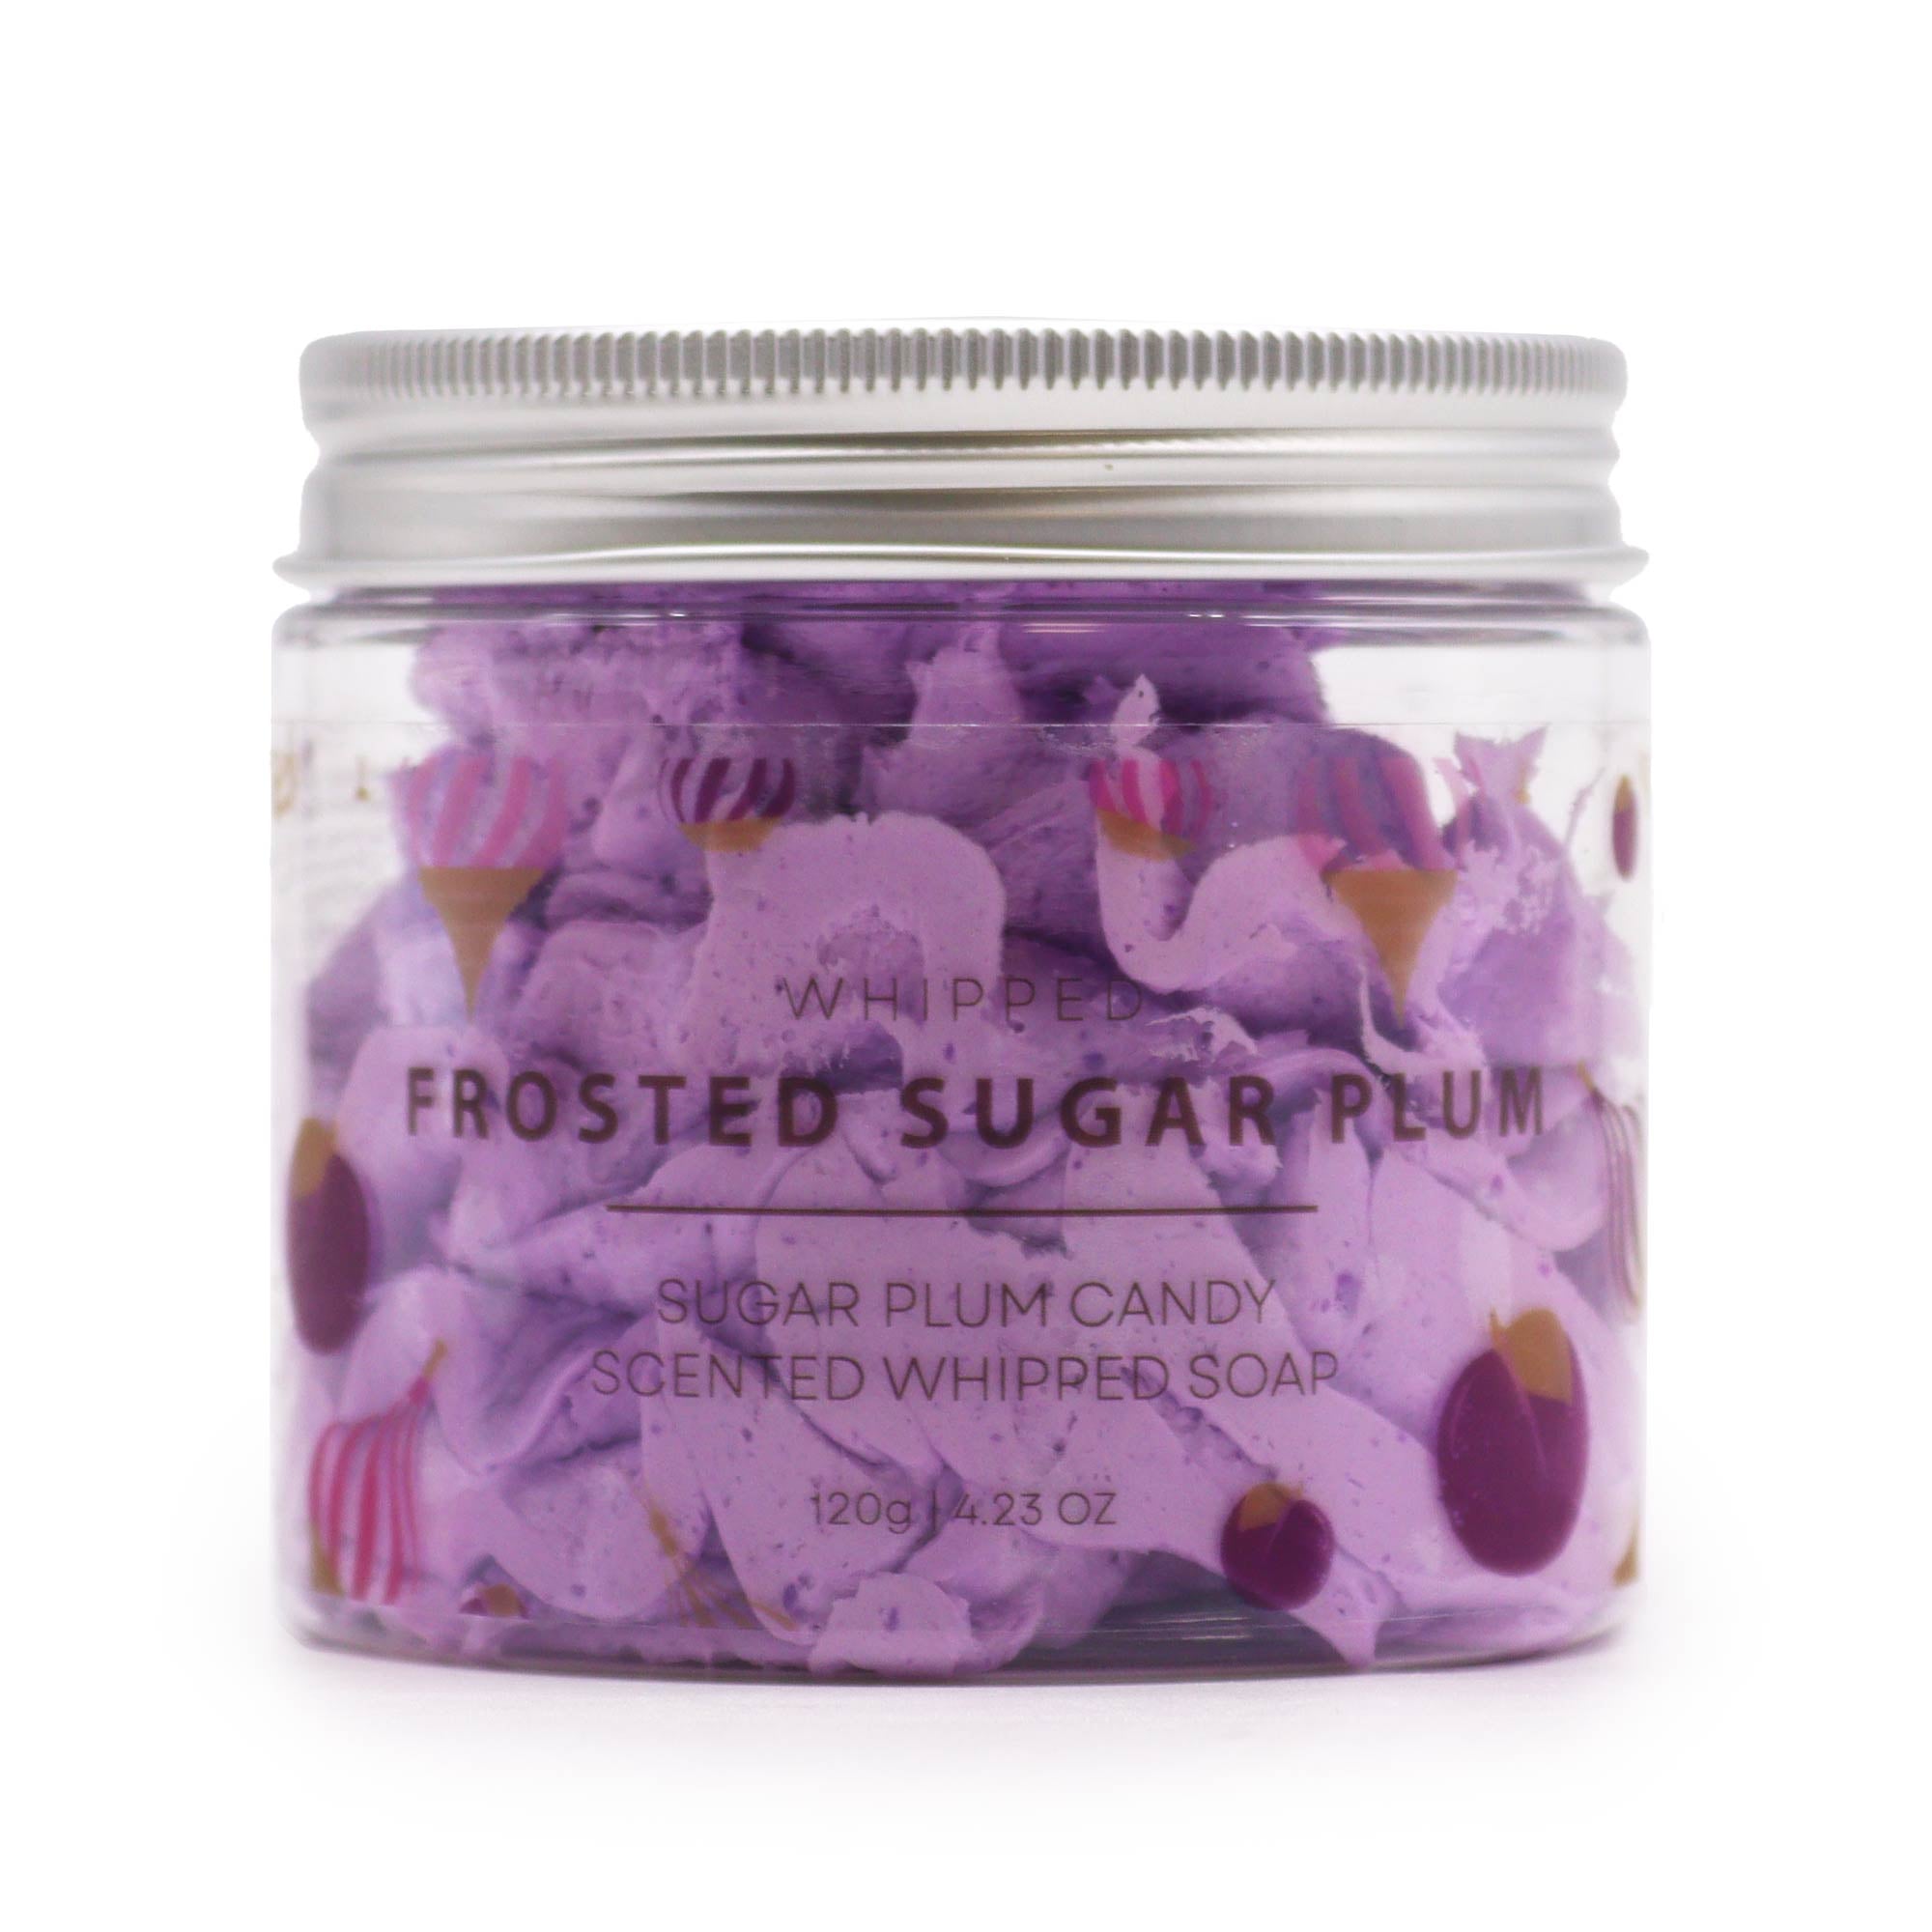 View Frosted Sugar Plum Whipped Cream Soap 120g information